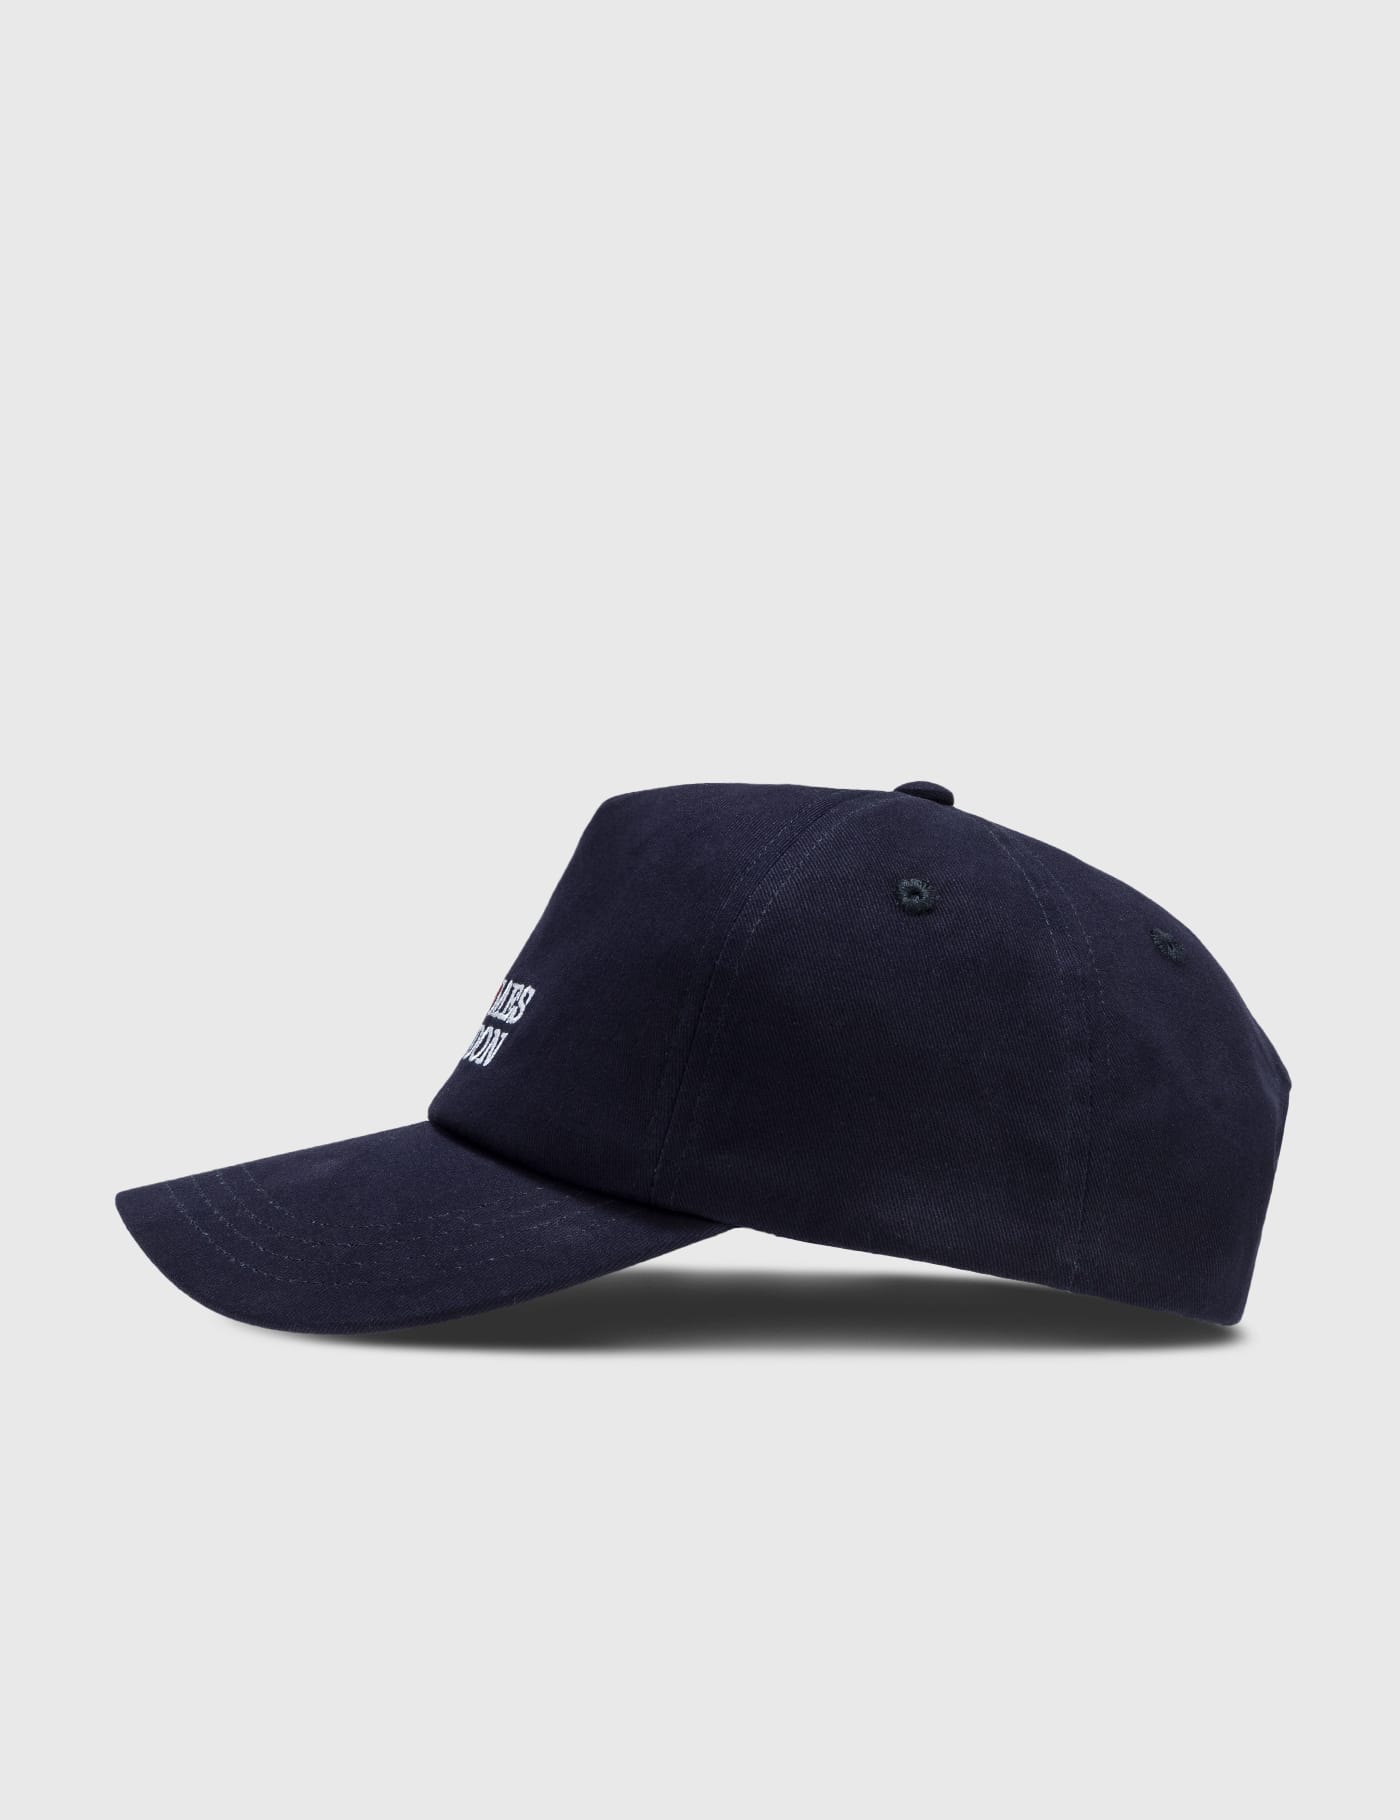 Thames MMXX - Tourist Cap | HBX - Globally Curated Fashion and